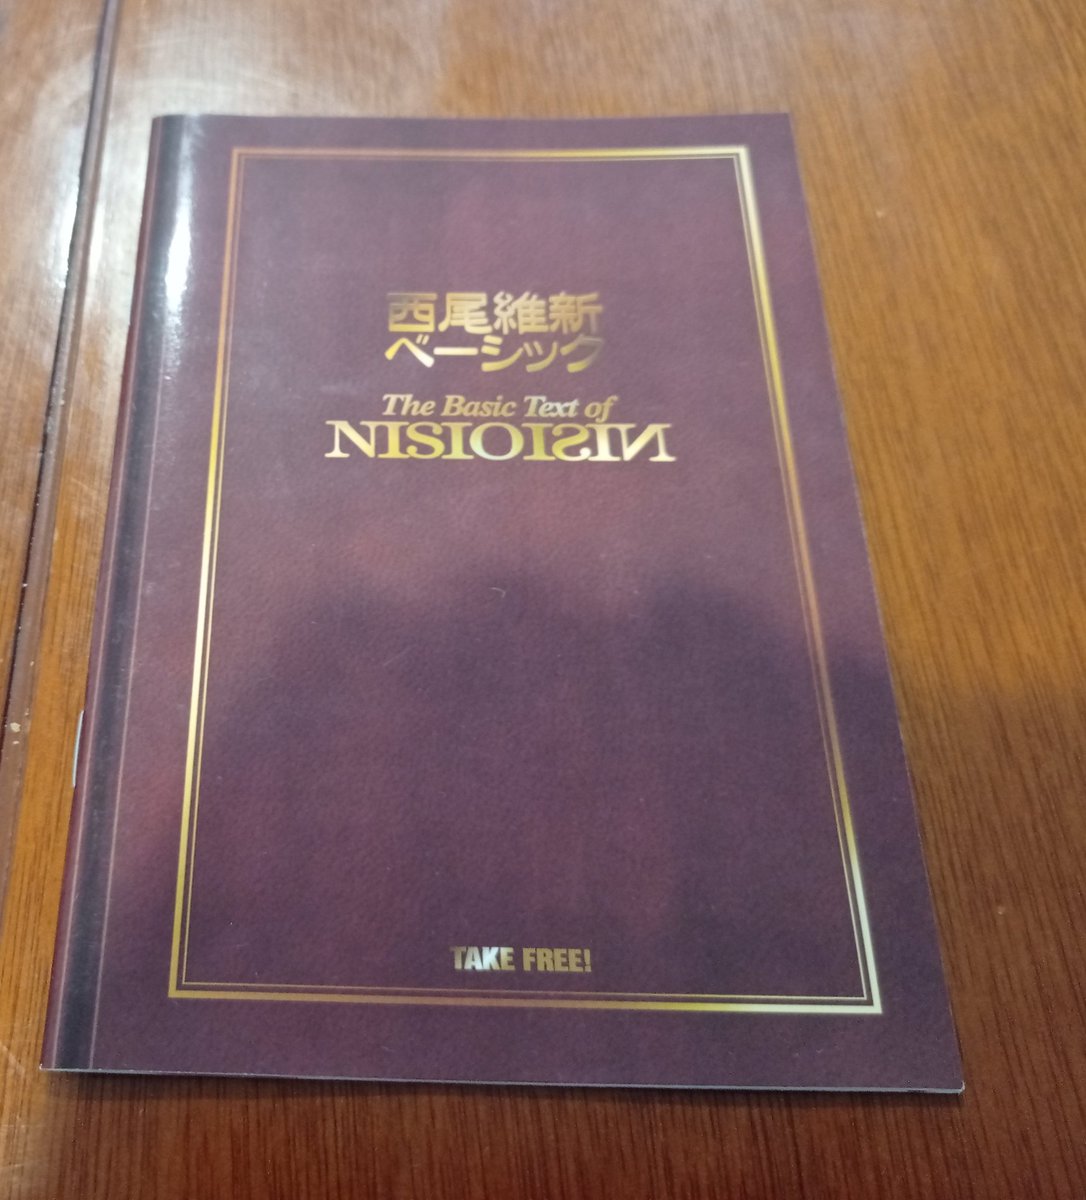 And a pamphlet called "the basic text of nisioisin" wich basically is about his history and the series he had published at the moment